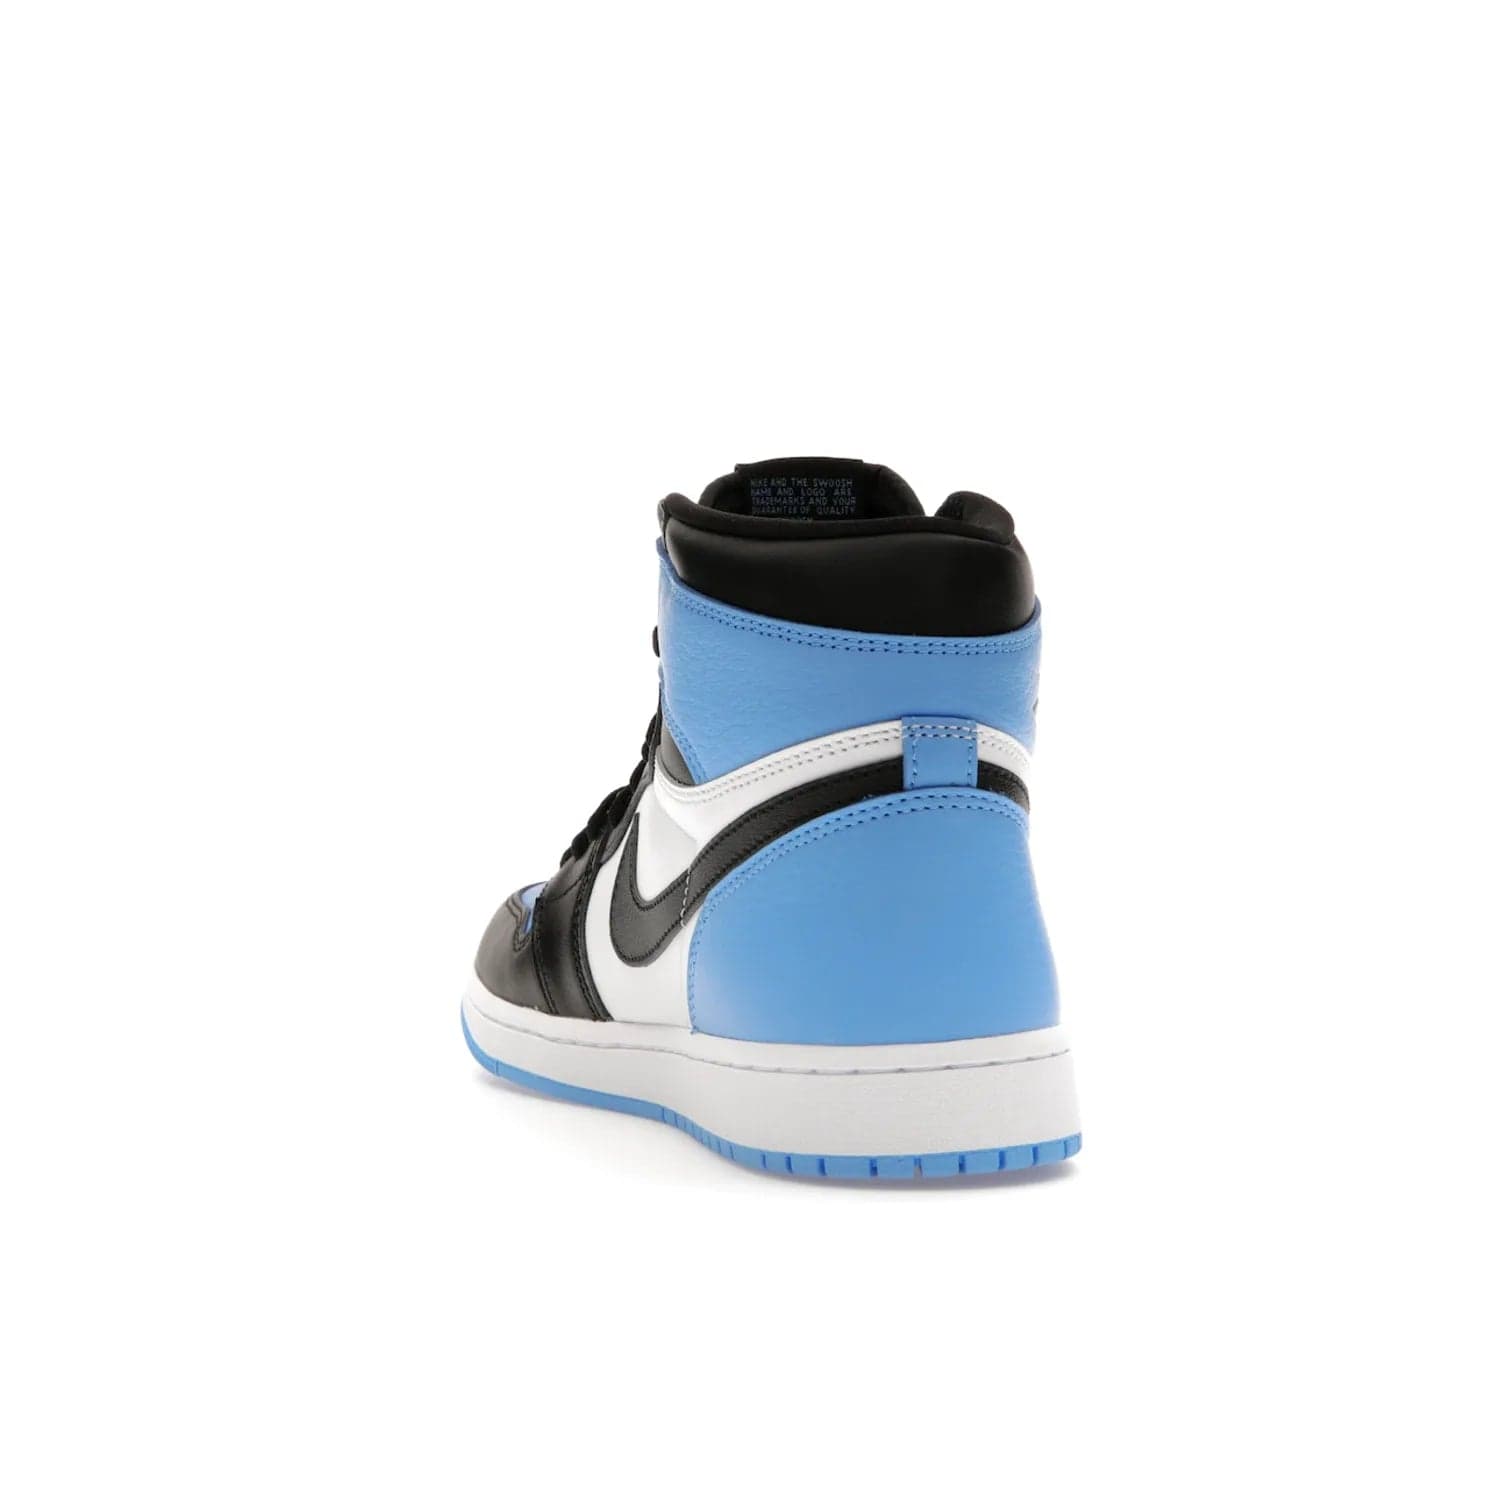 Jordan 1 Retro High OG UNC Toe - Image 26 - Only at www.BallersClubKickz.com - Jordan 1 High OG UNC Toe is a fashionable, high-quality sneaker featuring University Blue, Black White and White. Releasing July 22, 2023, it's the perfect pick up for sneakerheads.